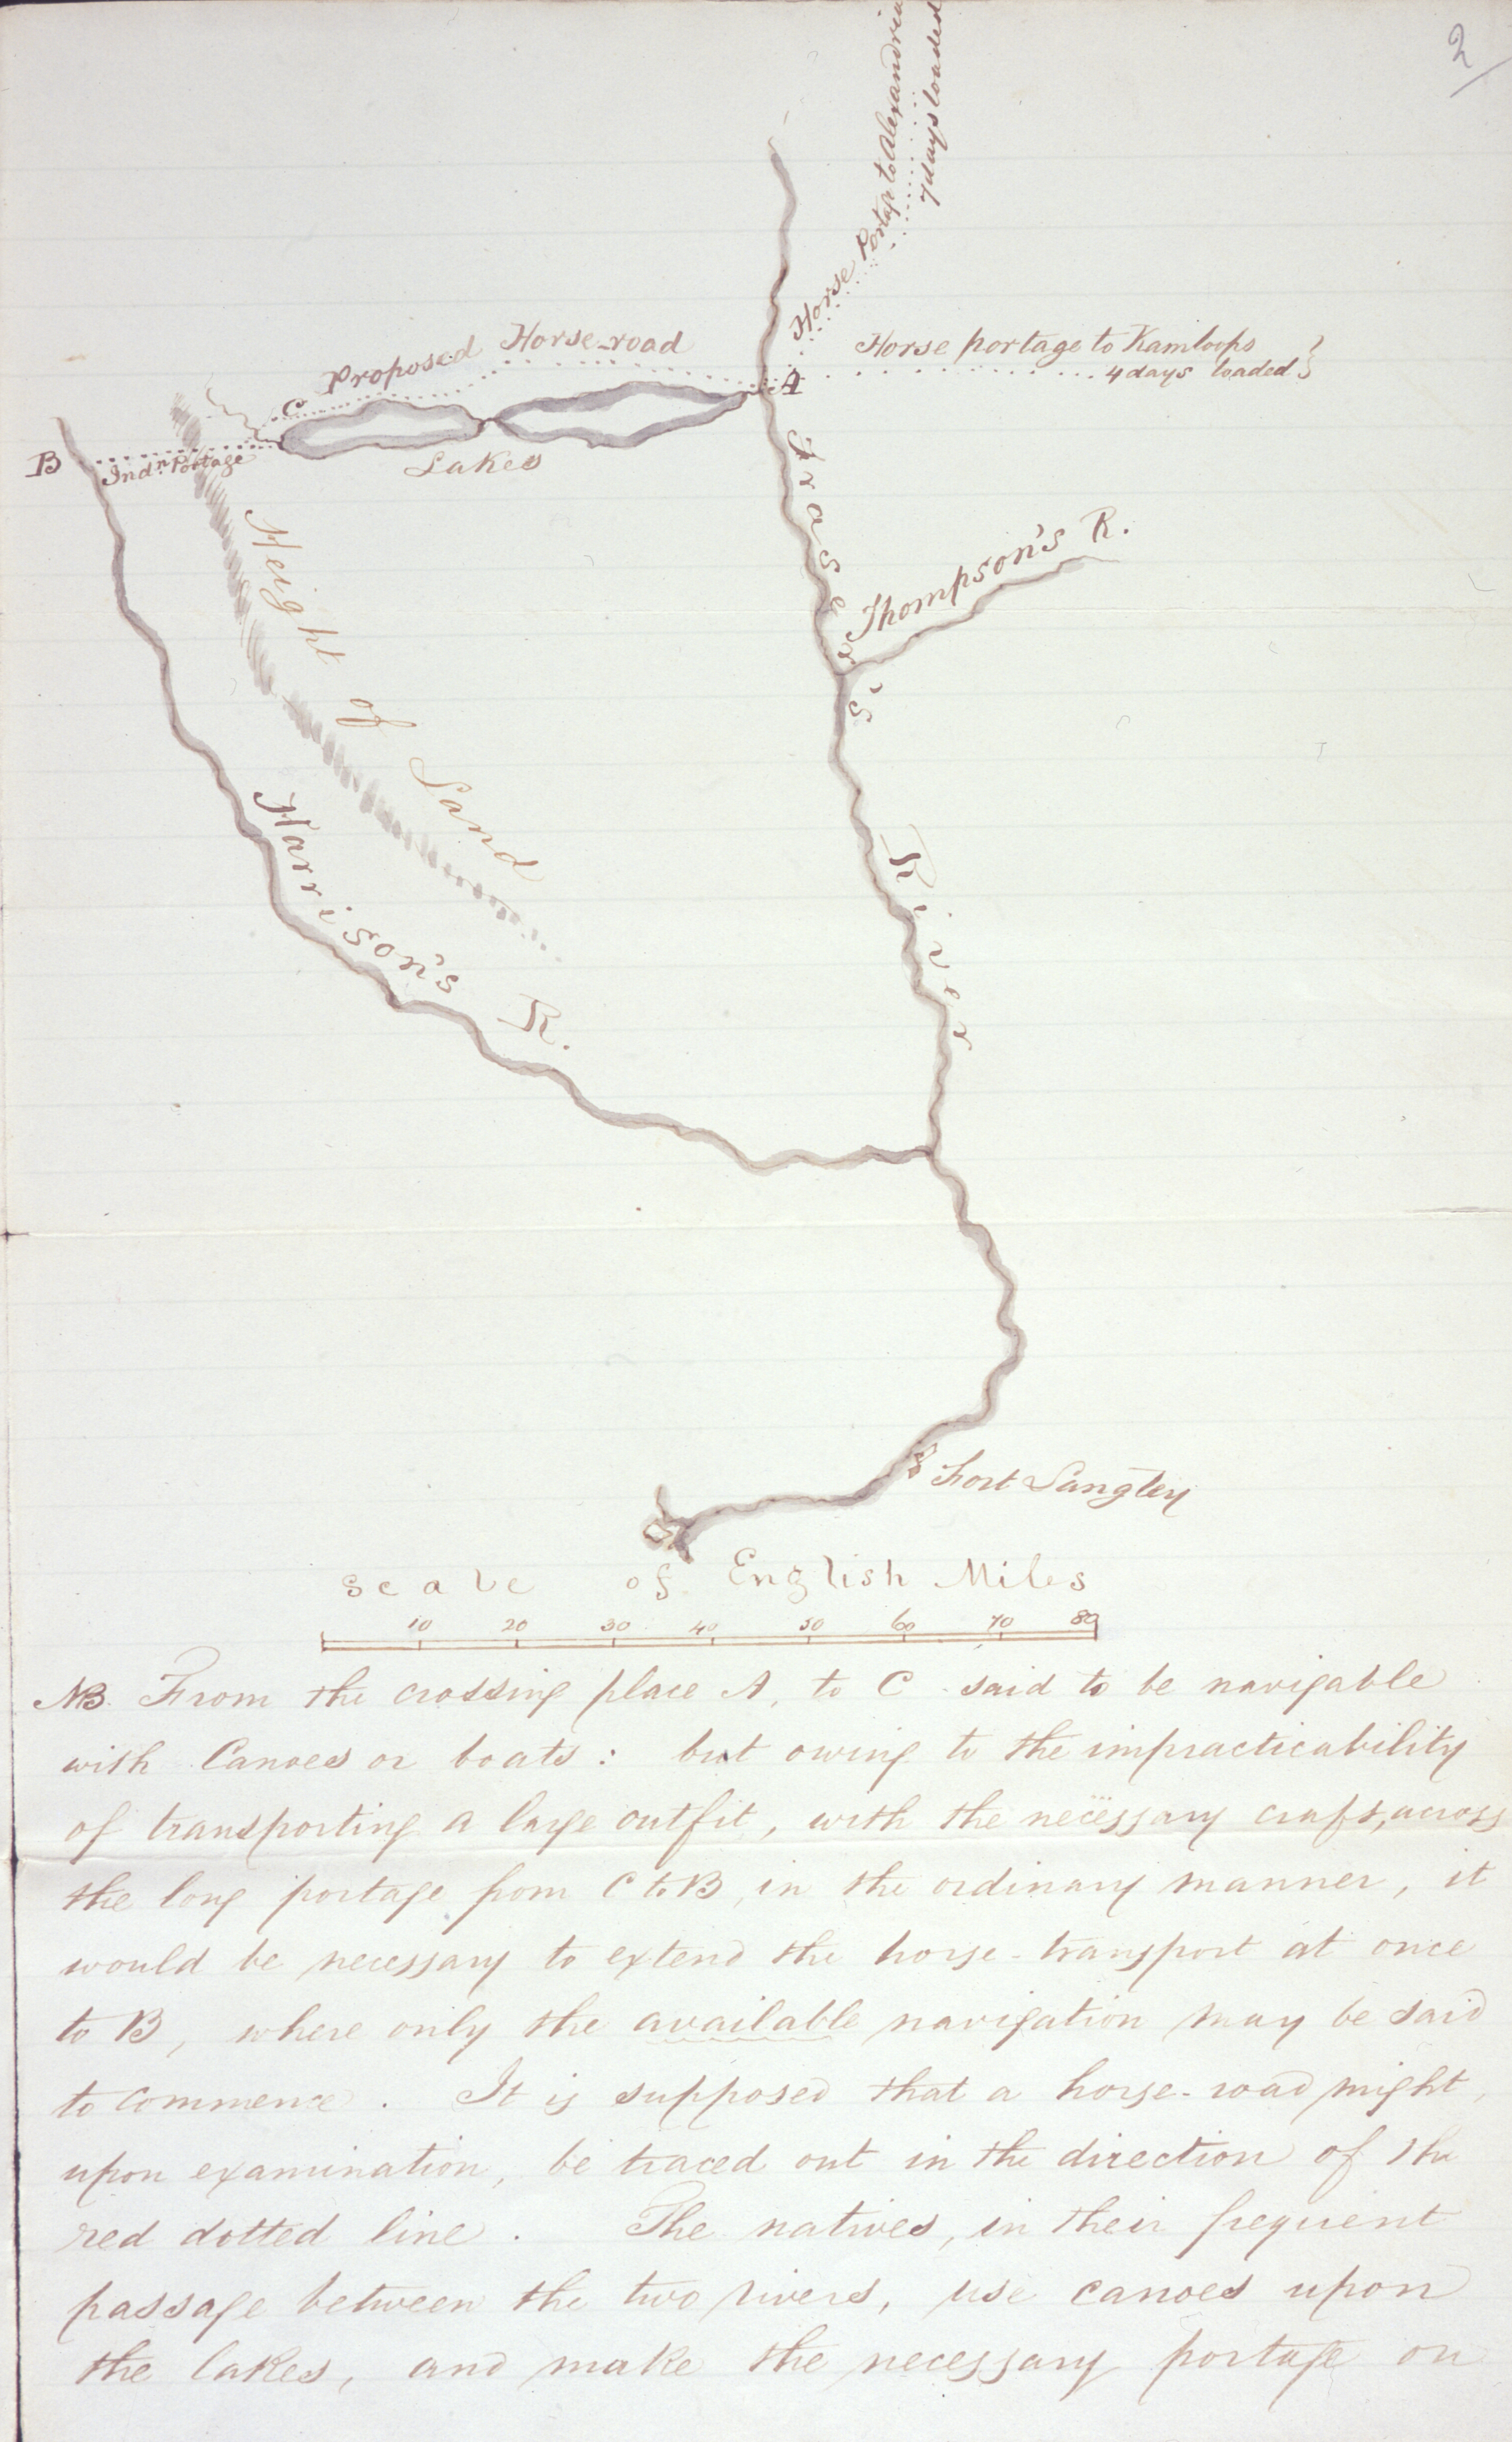 Sketch map accompanying Suggestions for the exploration of a new route of communication by which…the transport of the supplies and returns to and from the Districts of New Caledonia and Thompson's River might be advantageously cariedcarried on in connexion with Fort Langley and the new establishment of Victoria